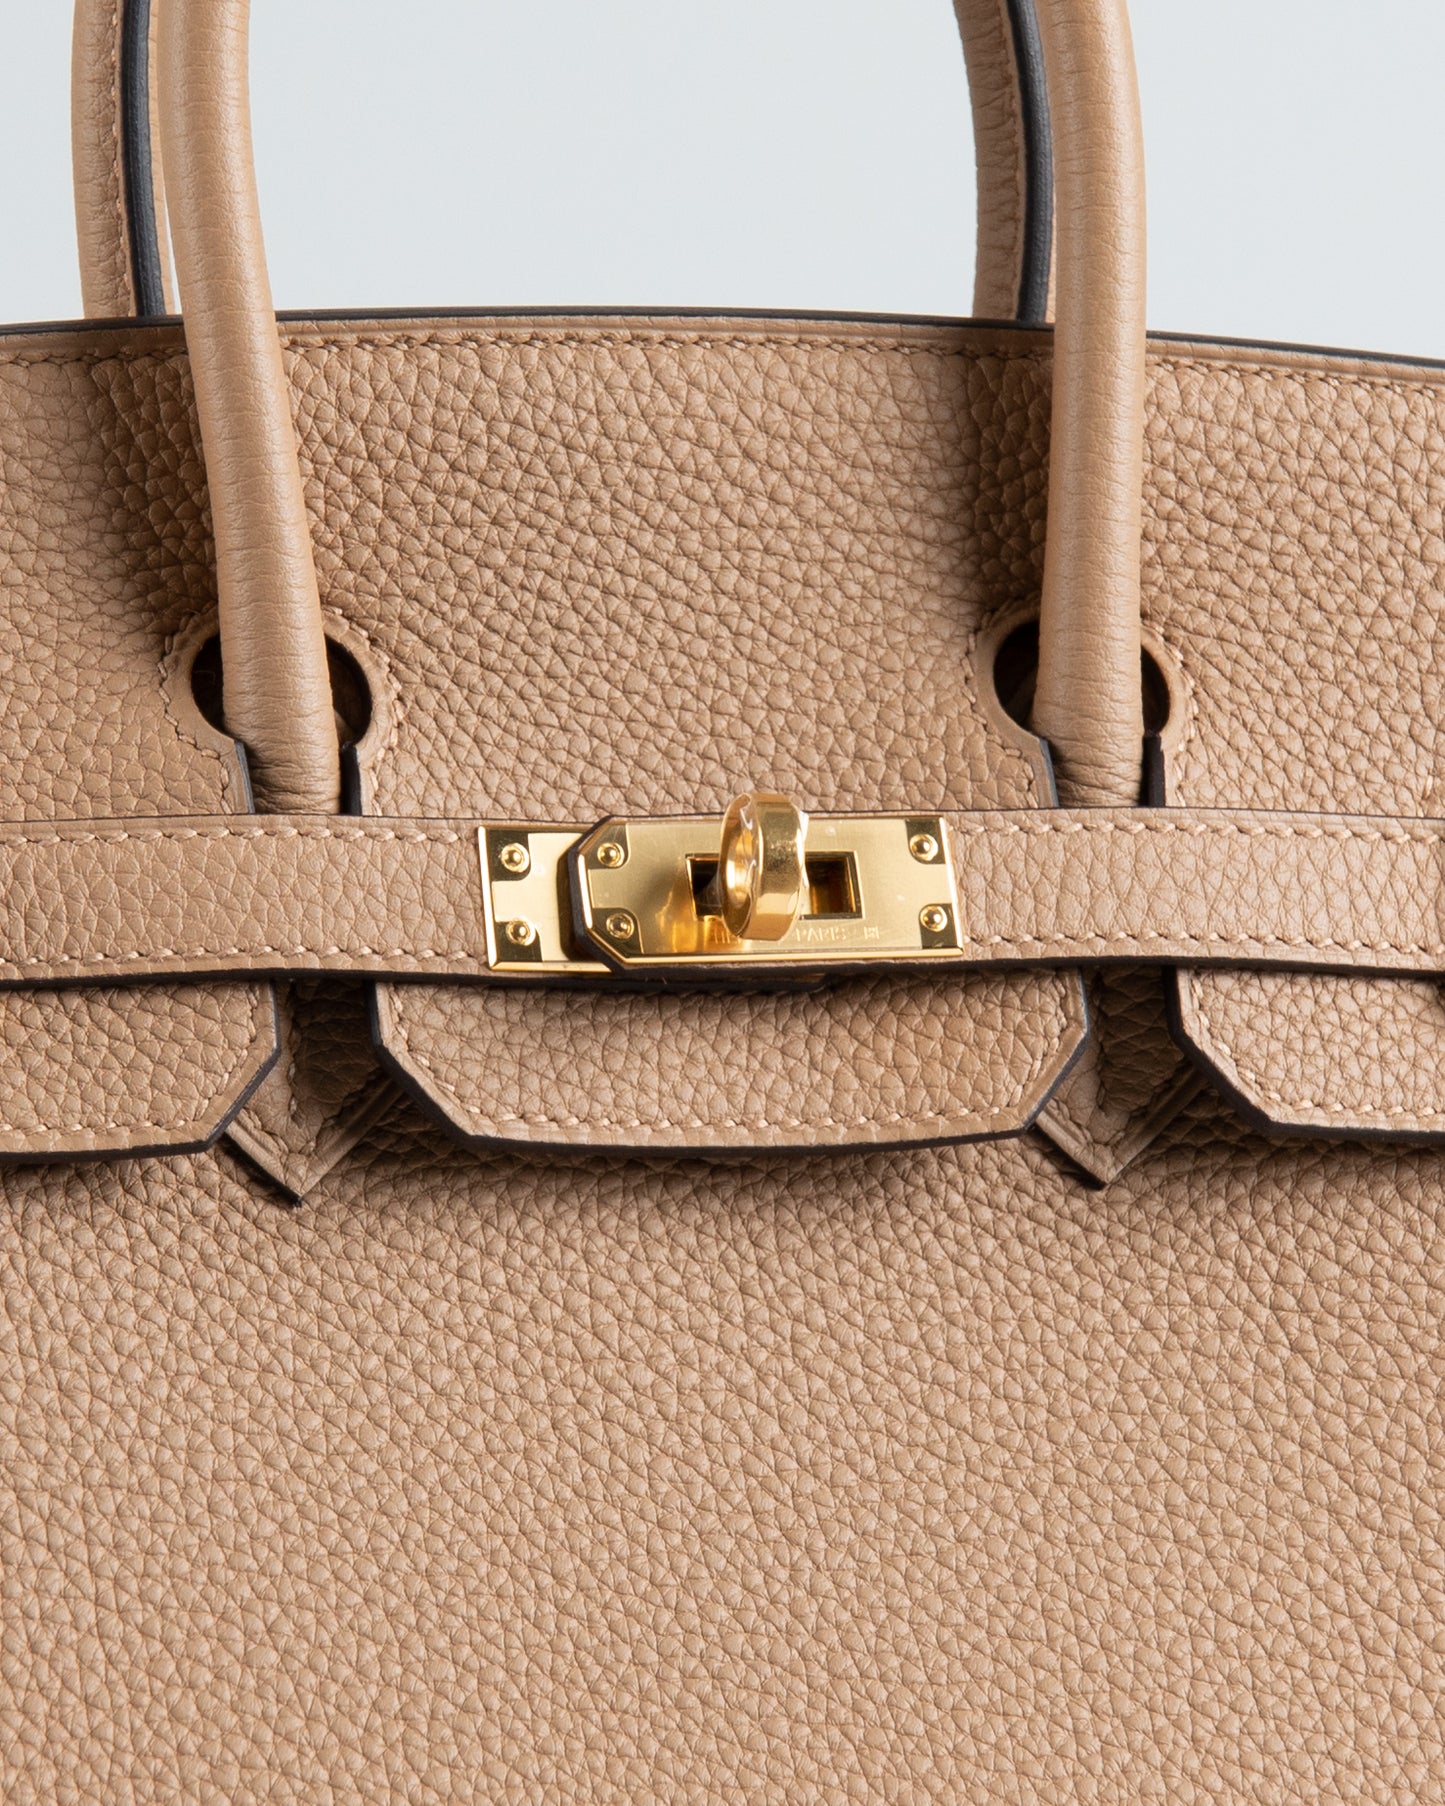 Sold at Auction: Hermes Chai Togo Leather Birkin 25 W/Gold Hardware